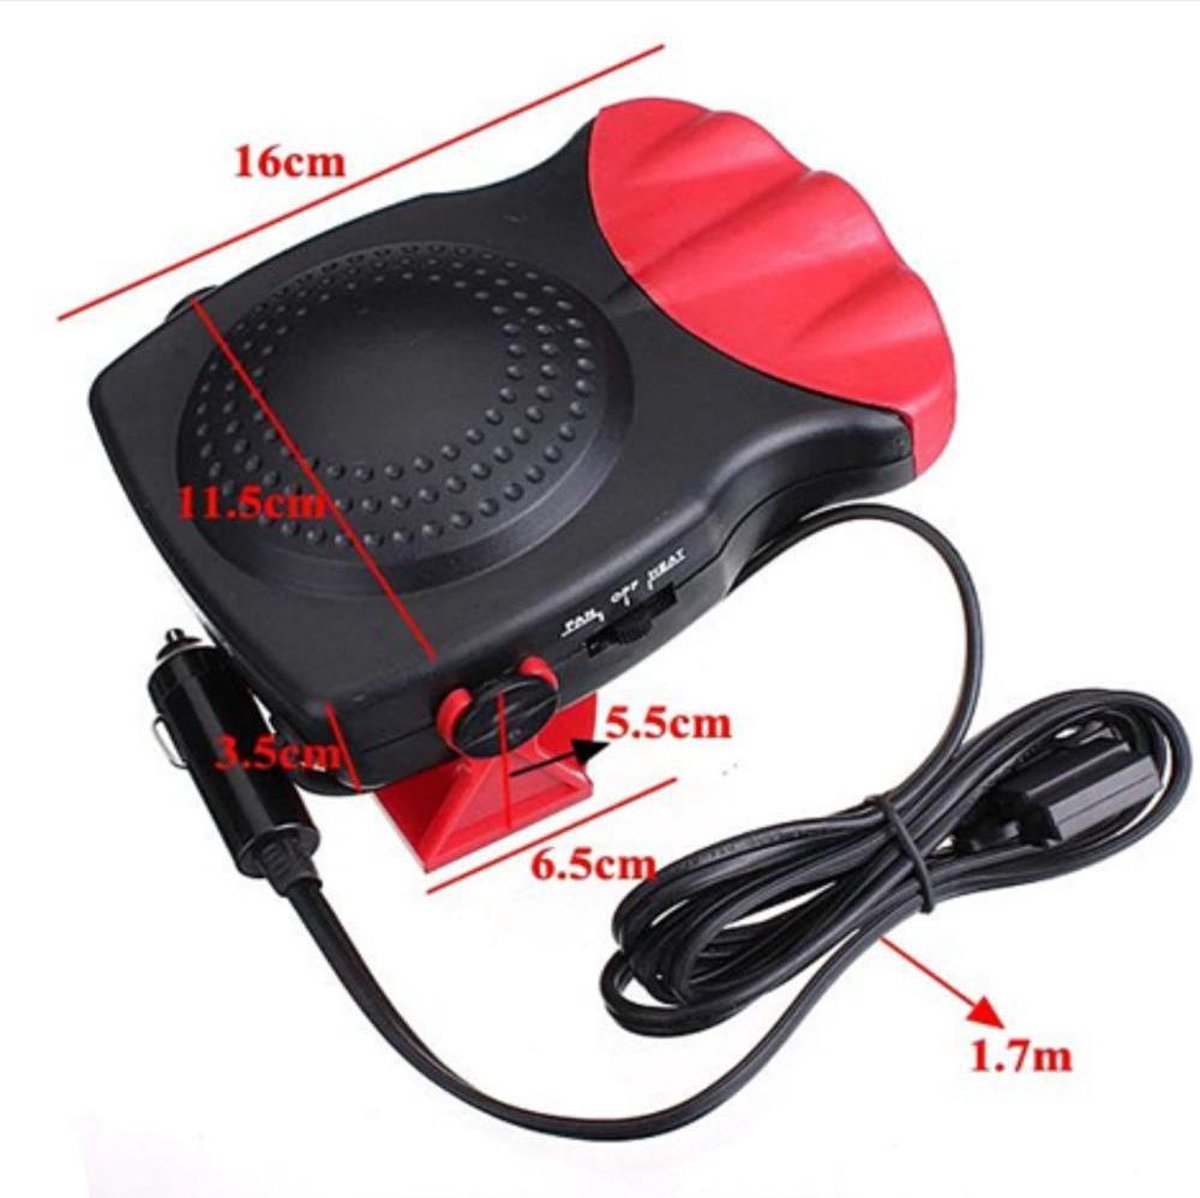 MASO Portable Car Heater CLCC 12V Fast Heating Defrost Defogger Demister Automobile Windscreen Heater for Easy Snow Removal 